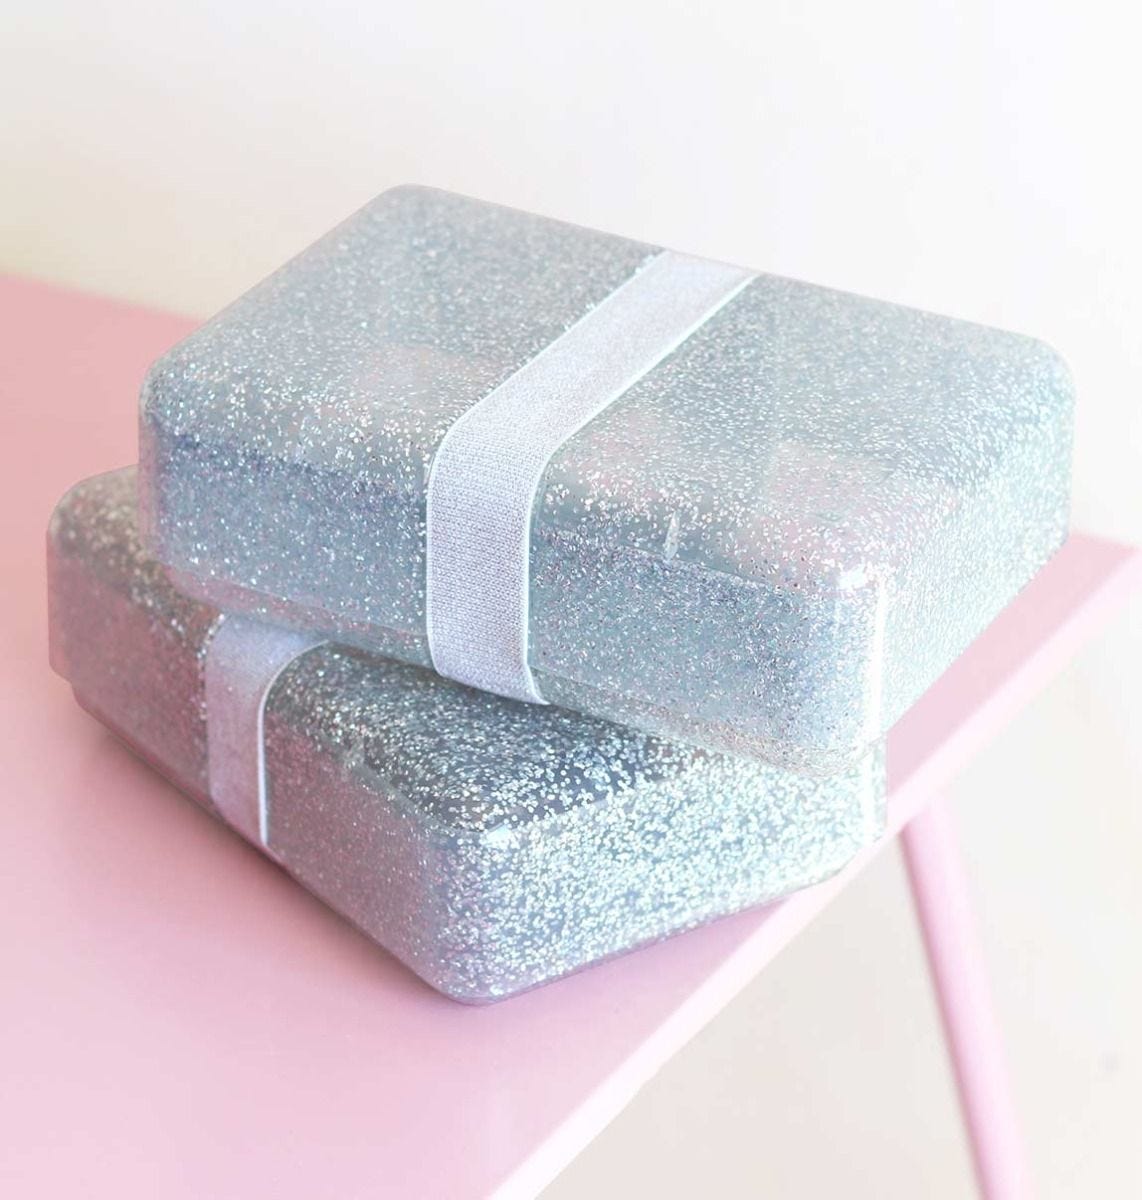 Afbeelding A Little Lovely Company Lunchbox I Glitter zilver